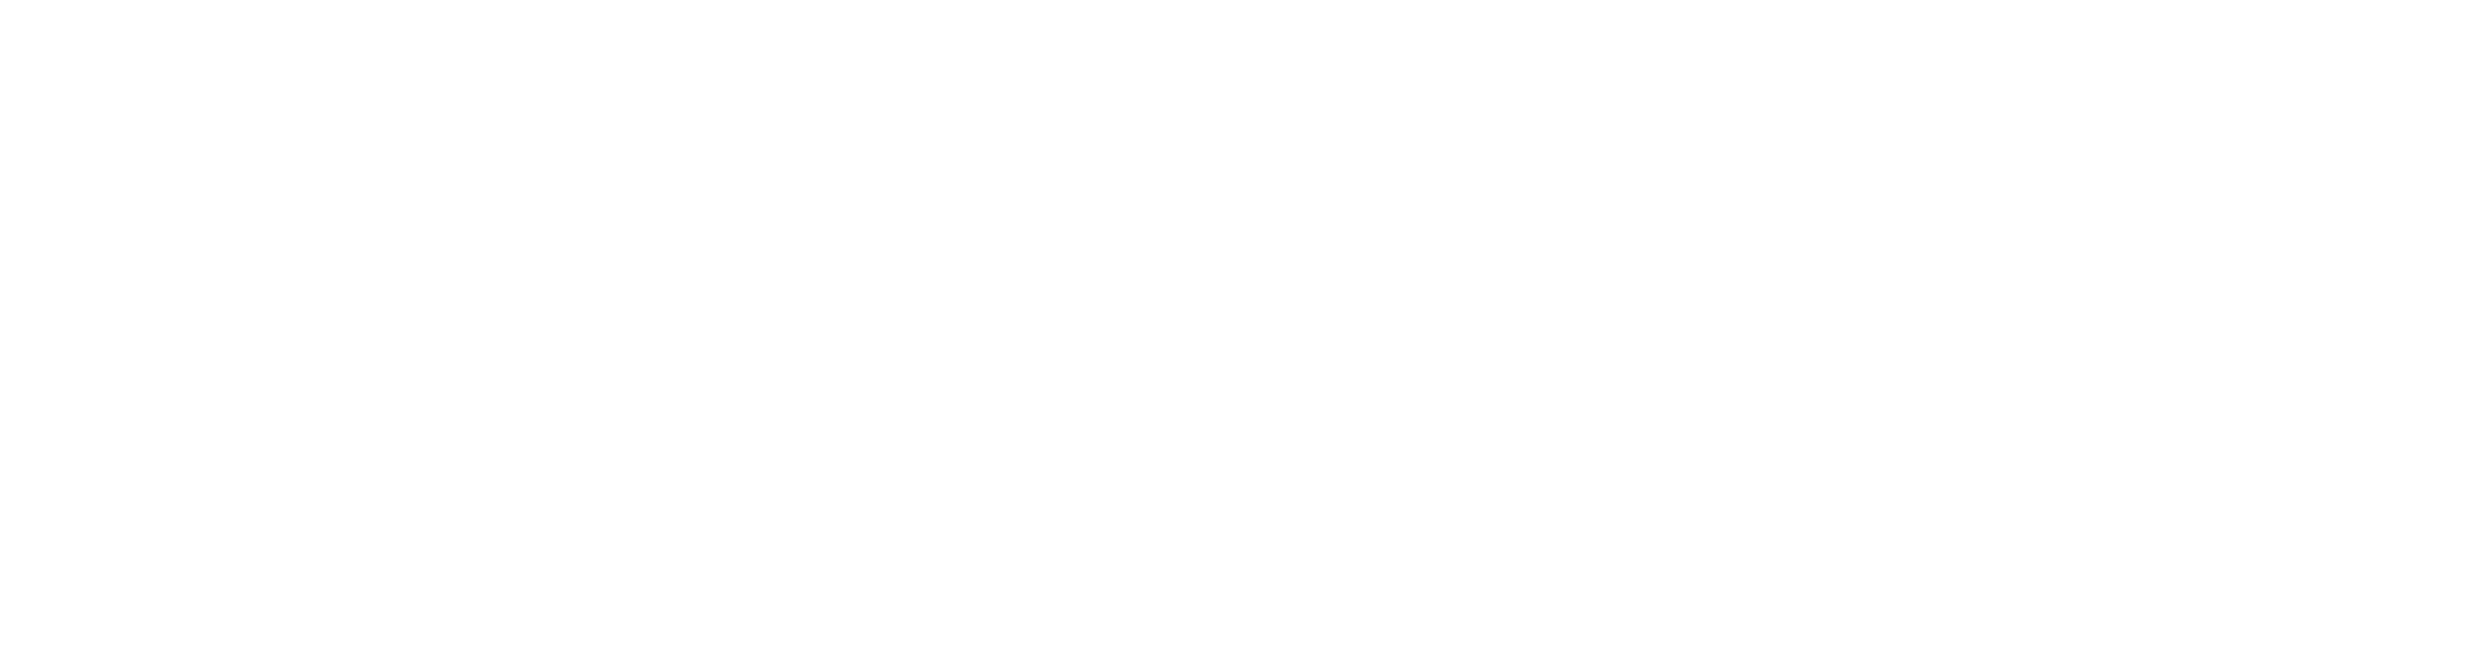 A Record year for texas tech research